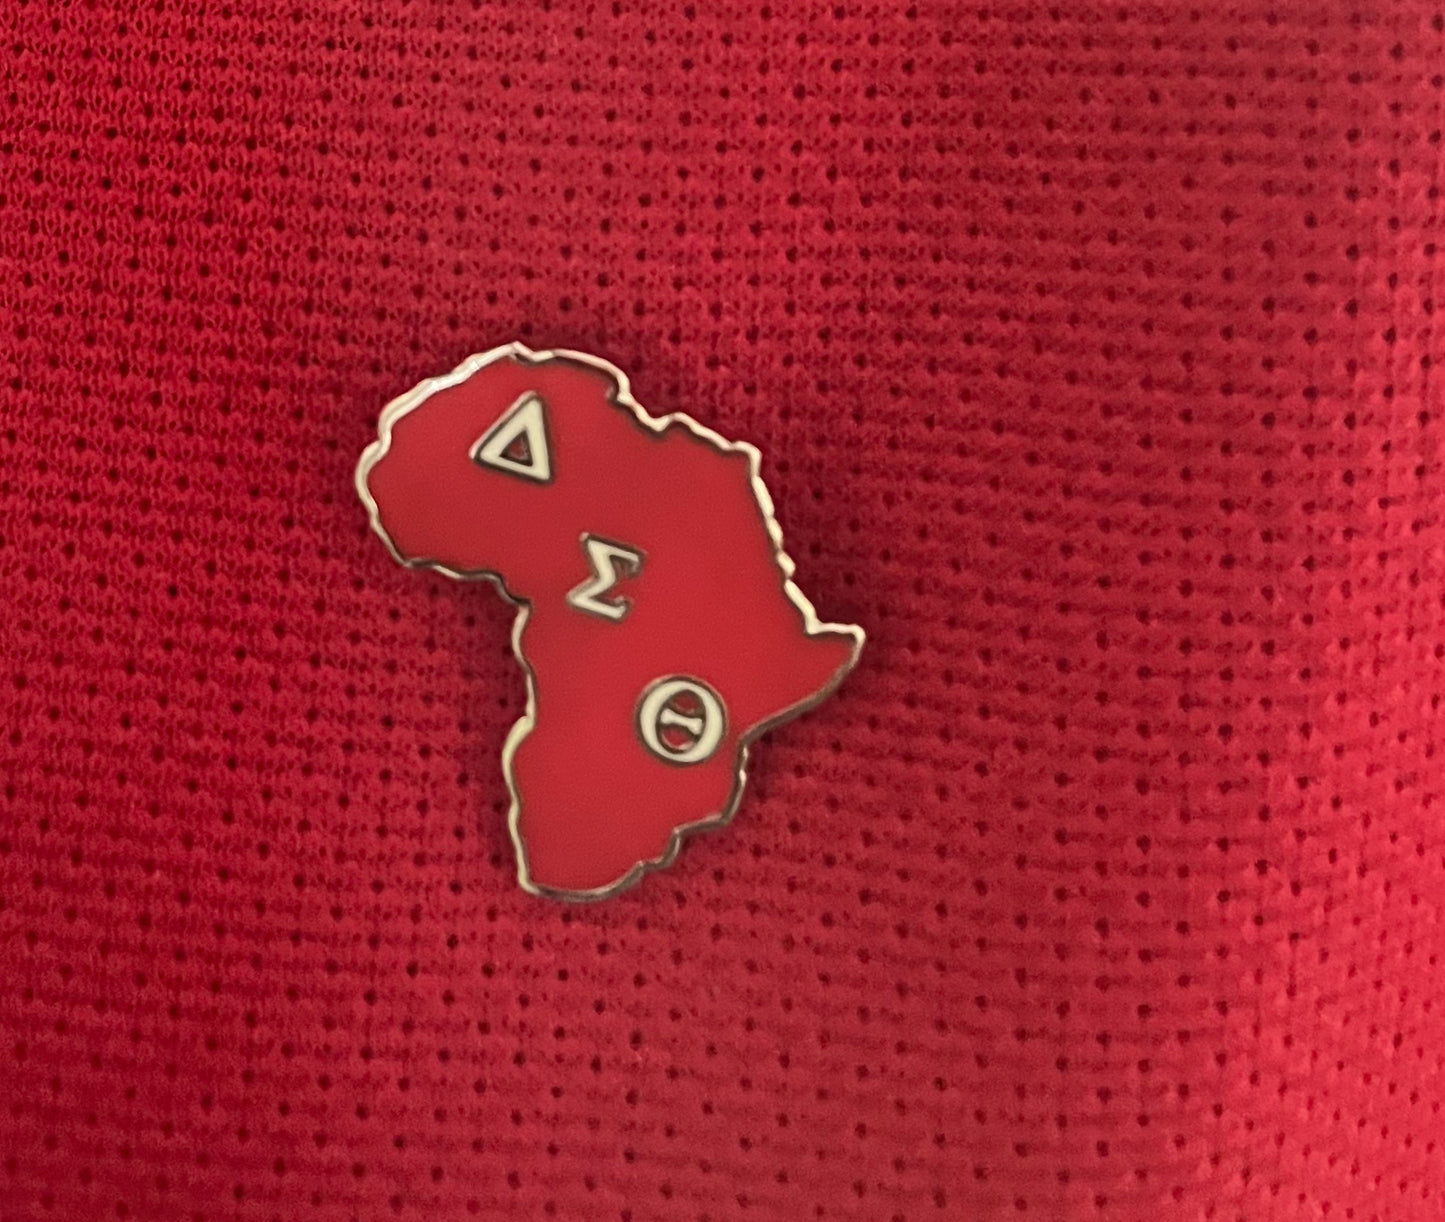 DST 1” Africa Lapel pin